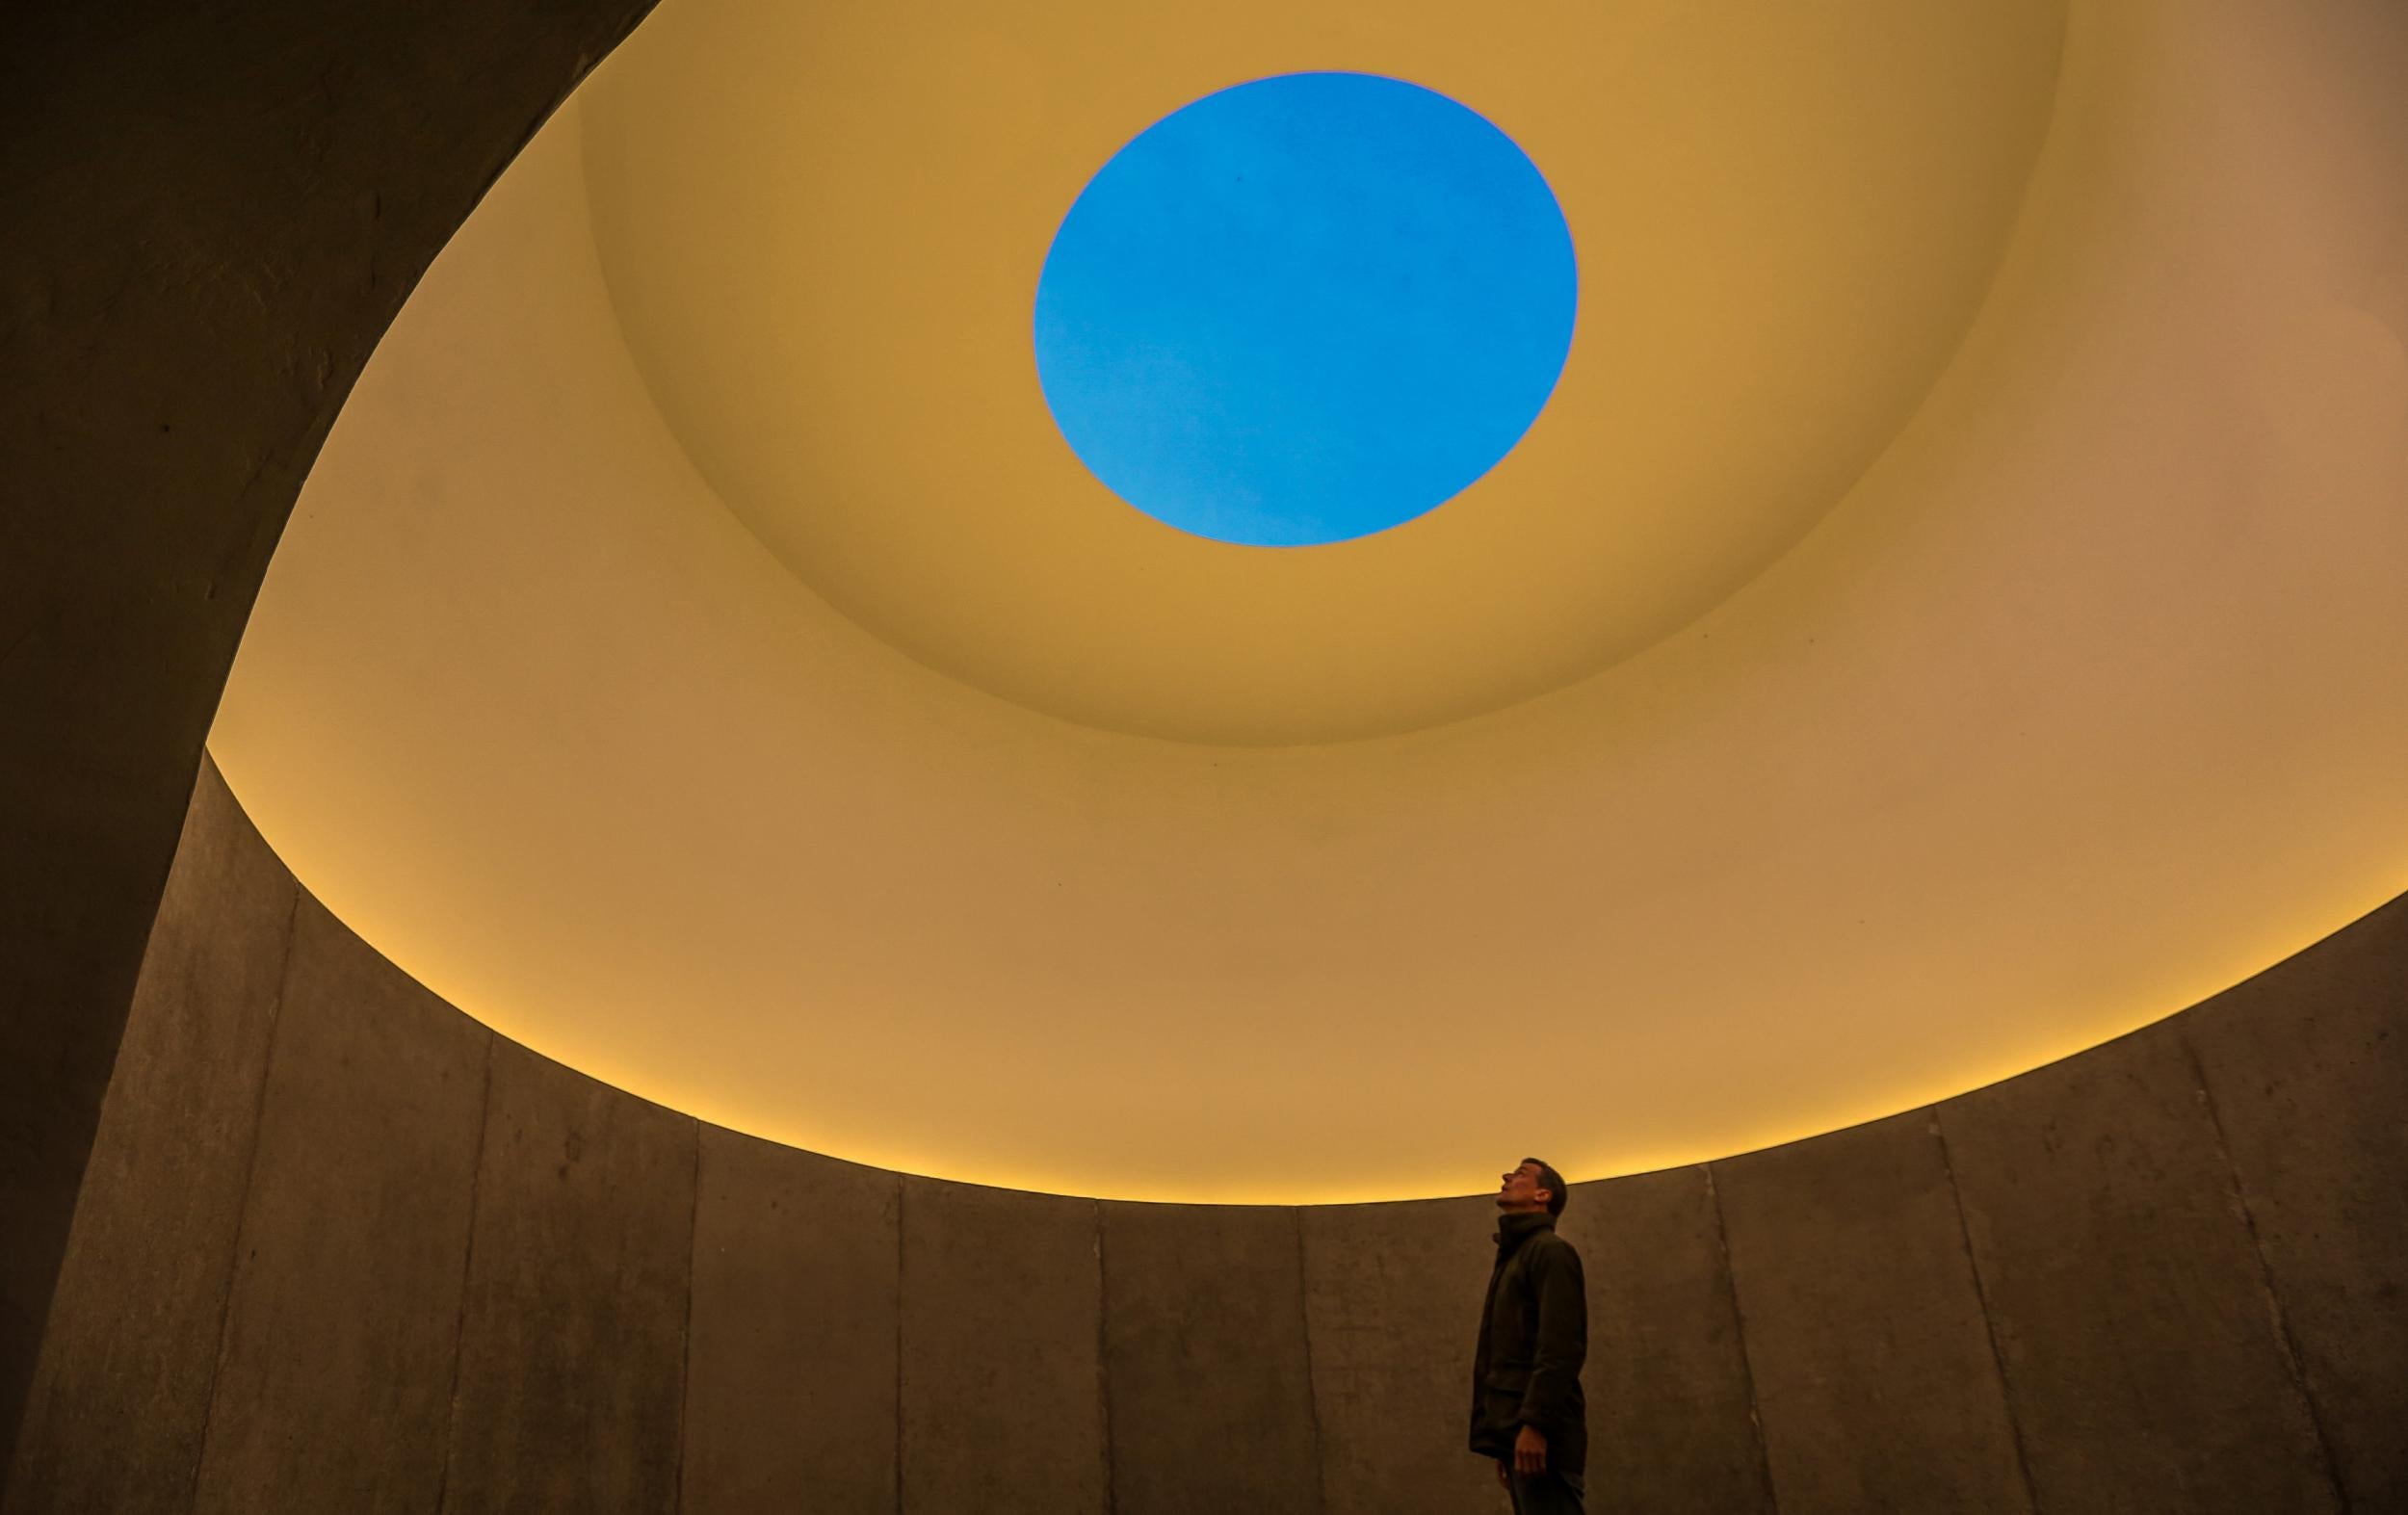 James Turrell’s skyscape is sure to enthral you, so much so you might forget to pick up your coat